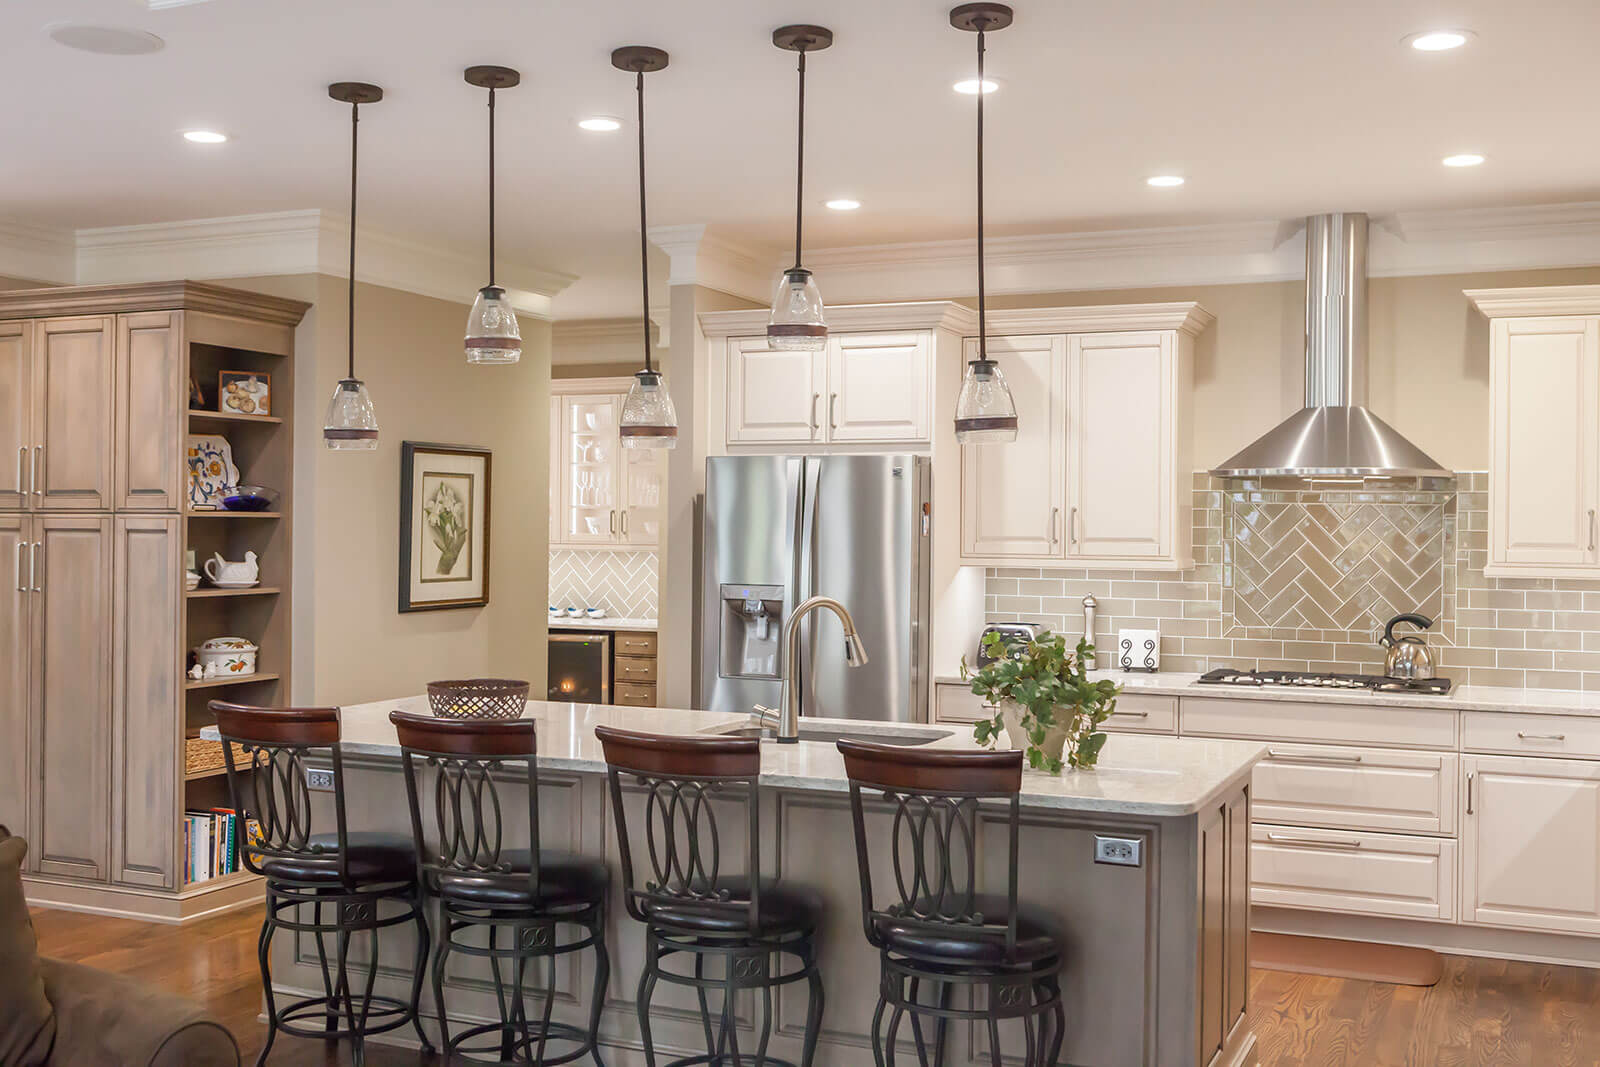 What is a traditional style kitchen?